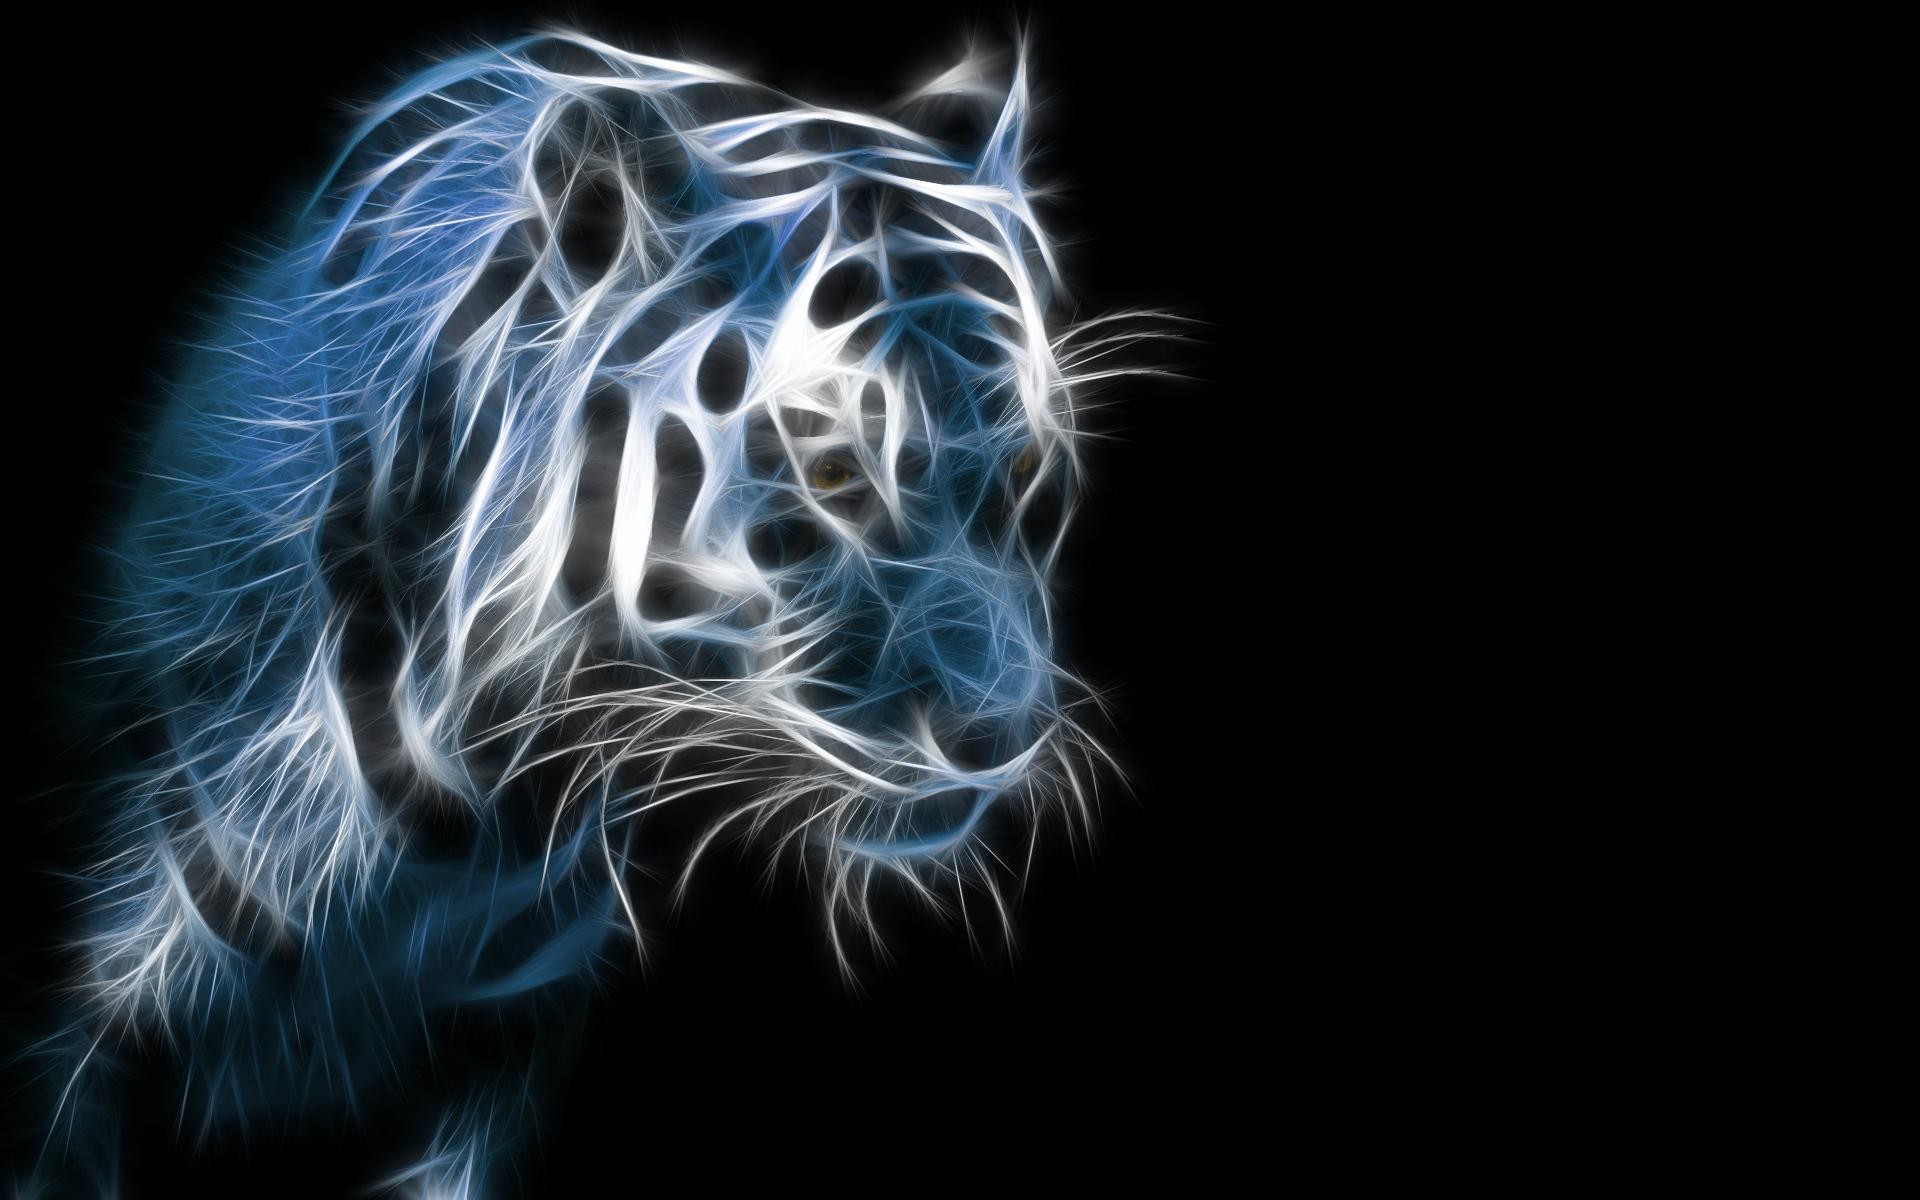 neon tiger wallpaper,whiskers,felidae,big cats,wildlife,electric blue